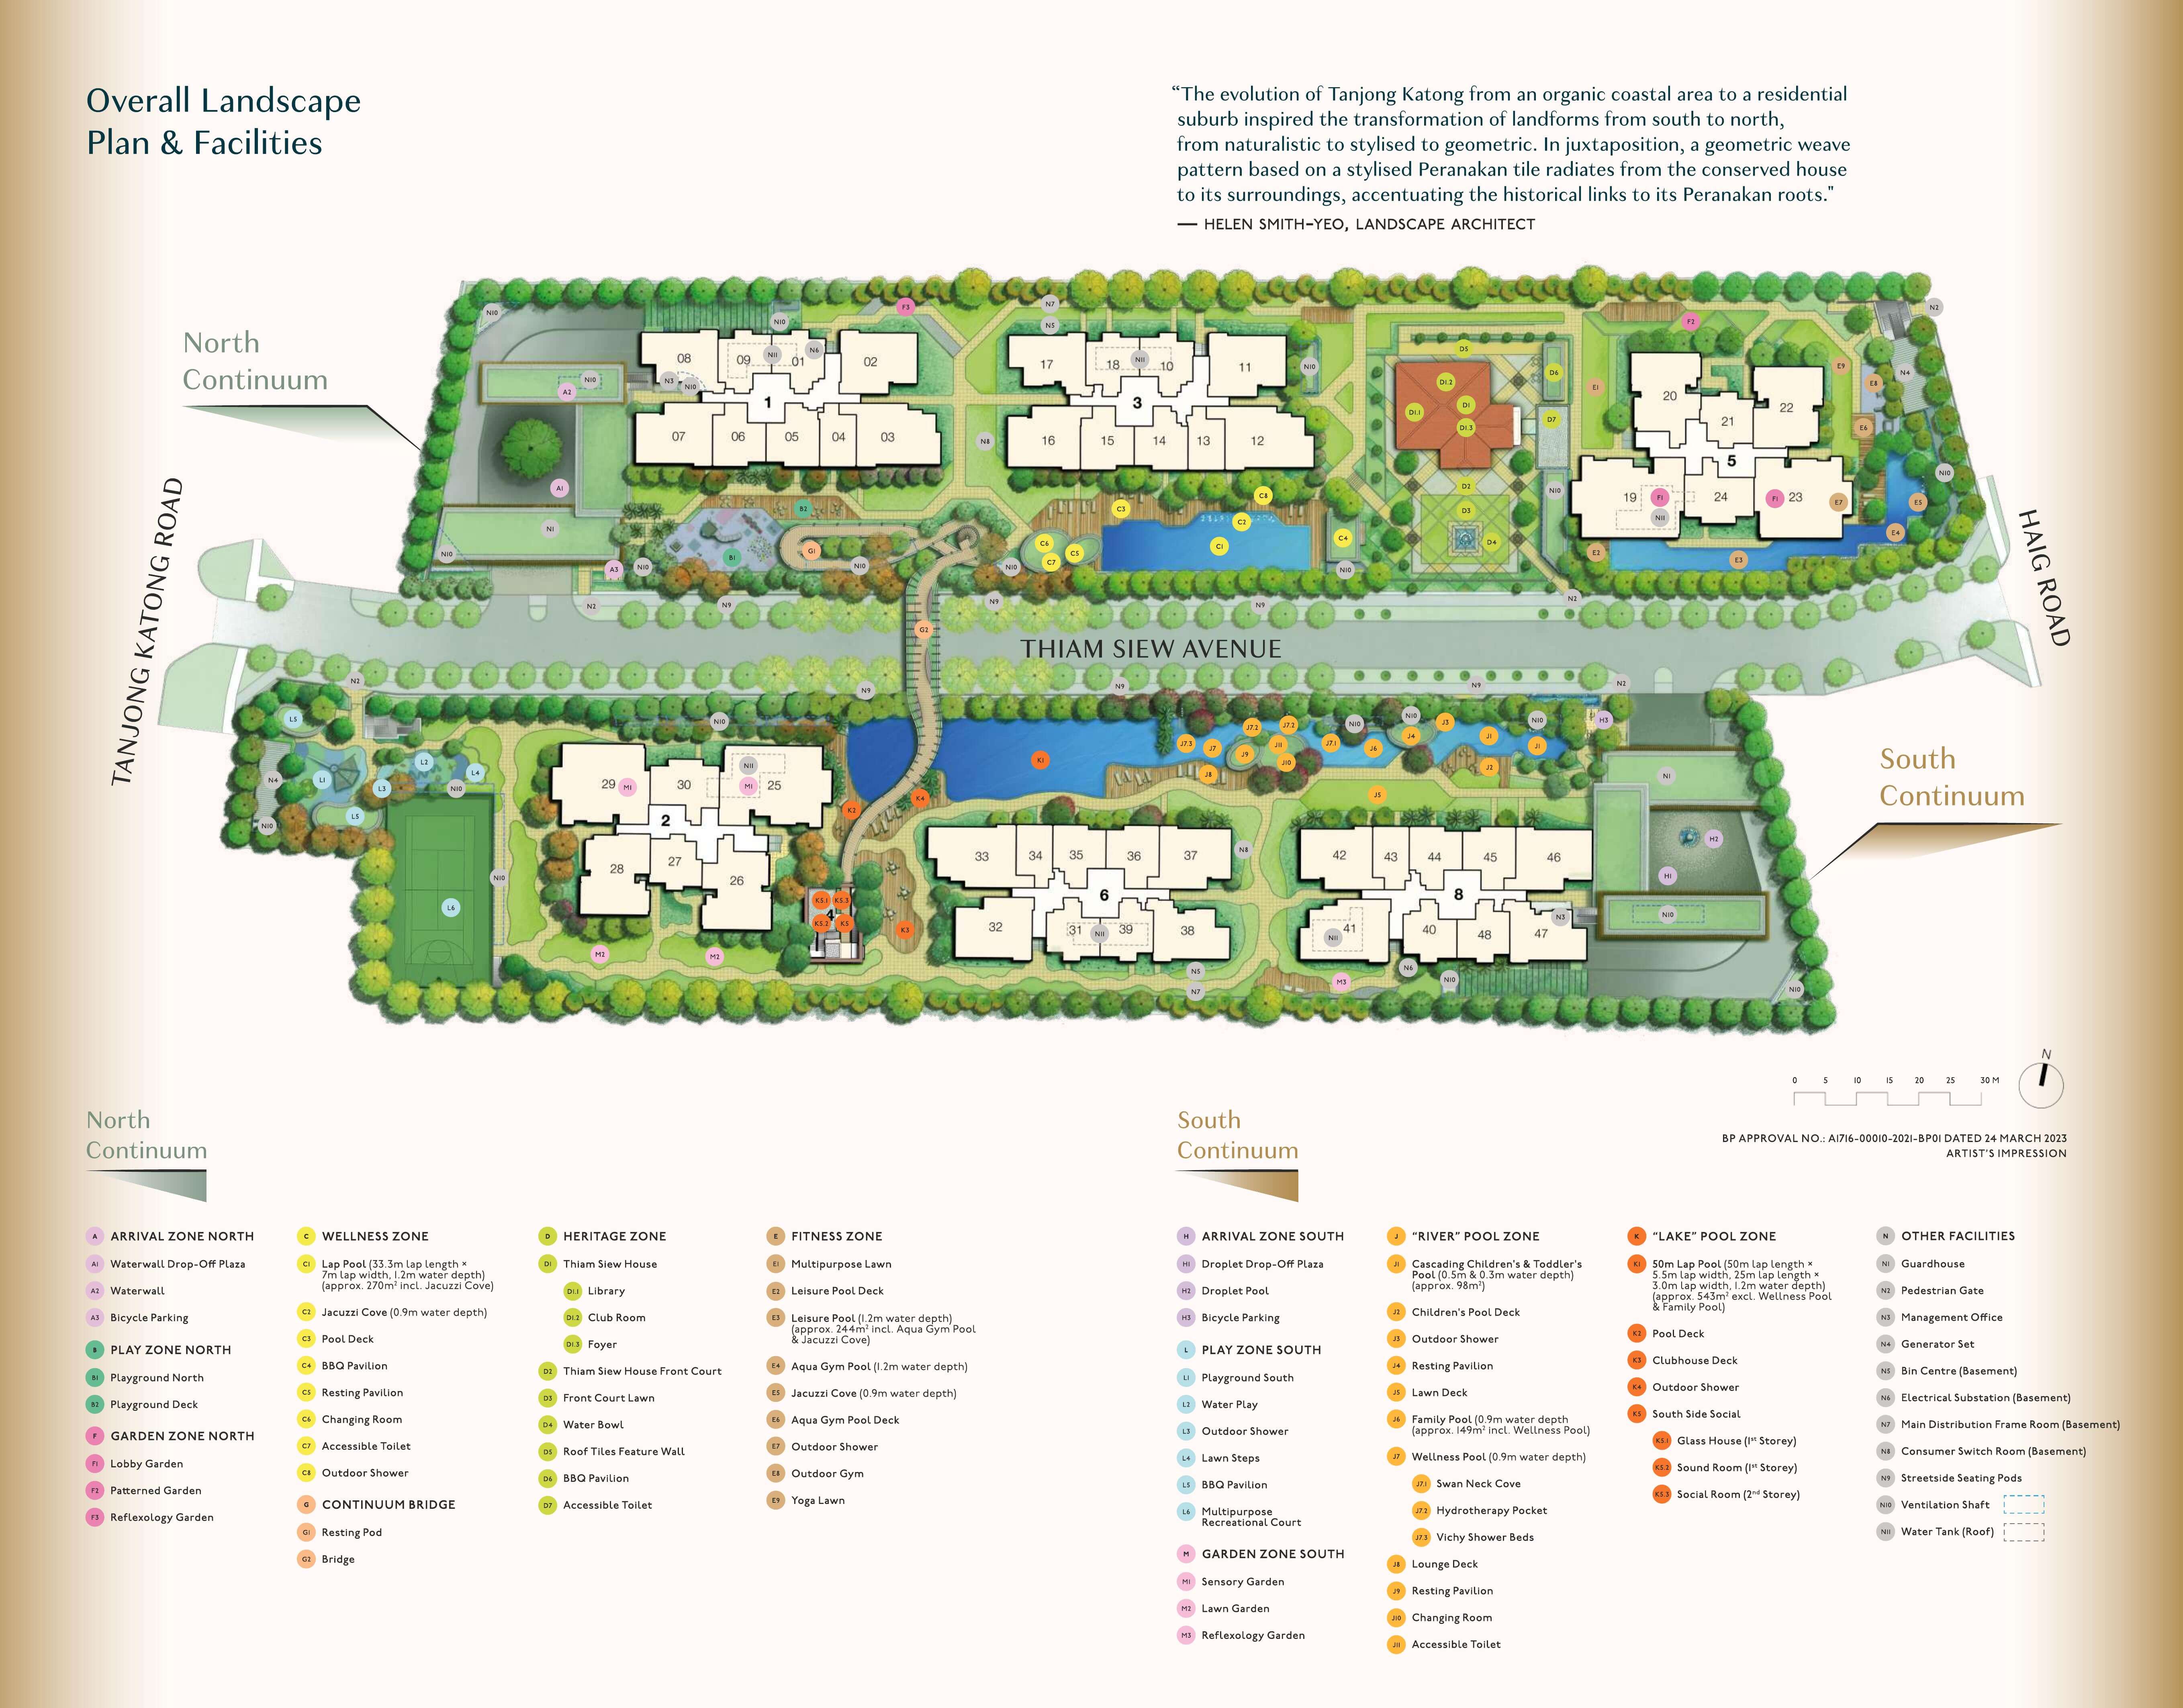 The Continuum Site Plan - Overall Landscape